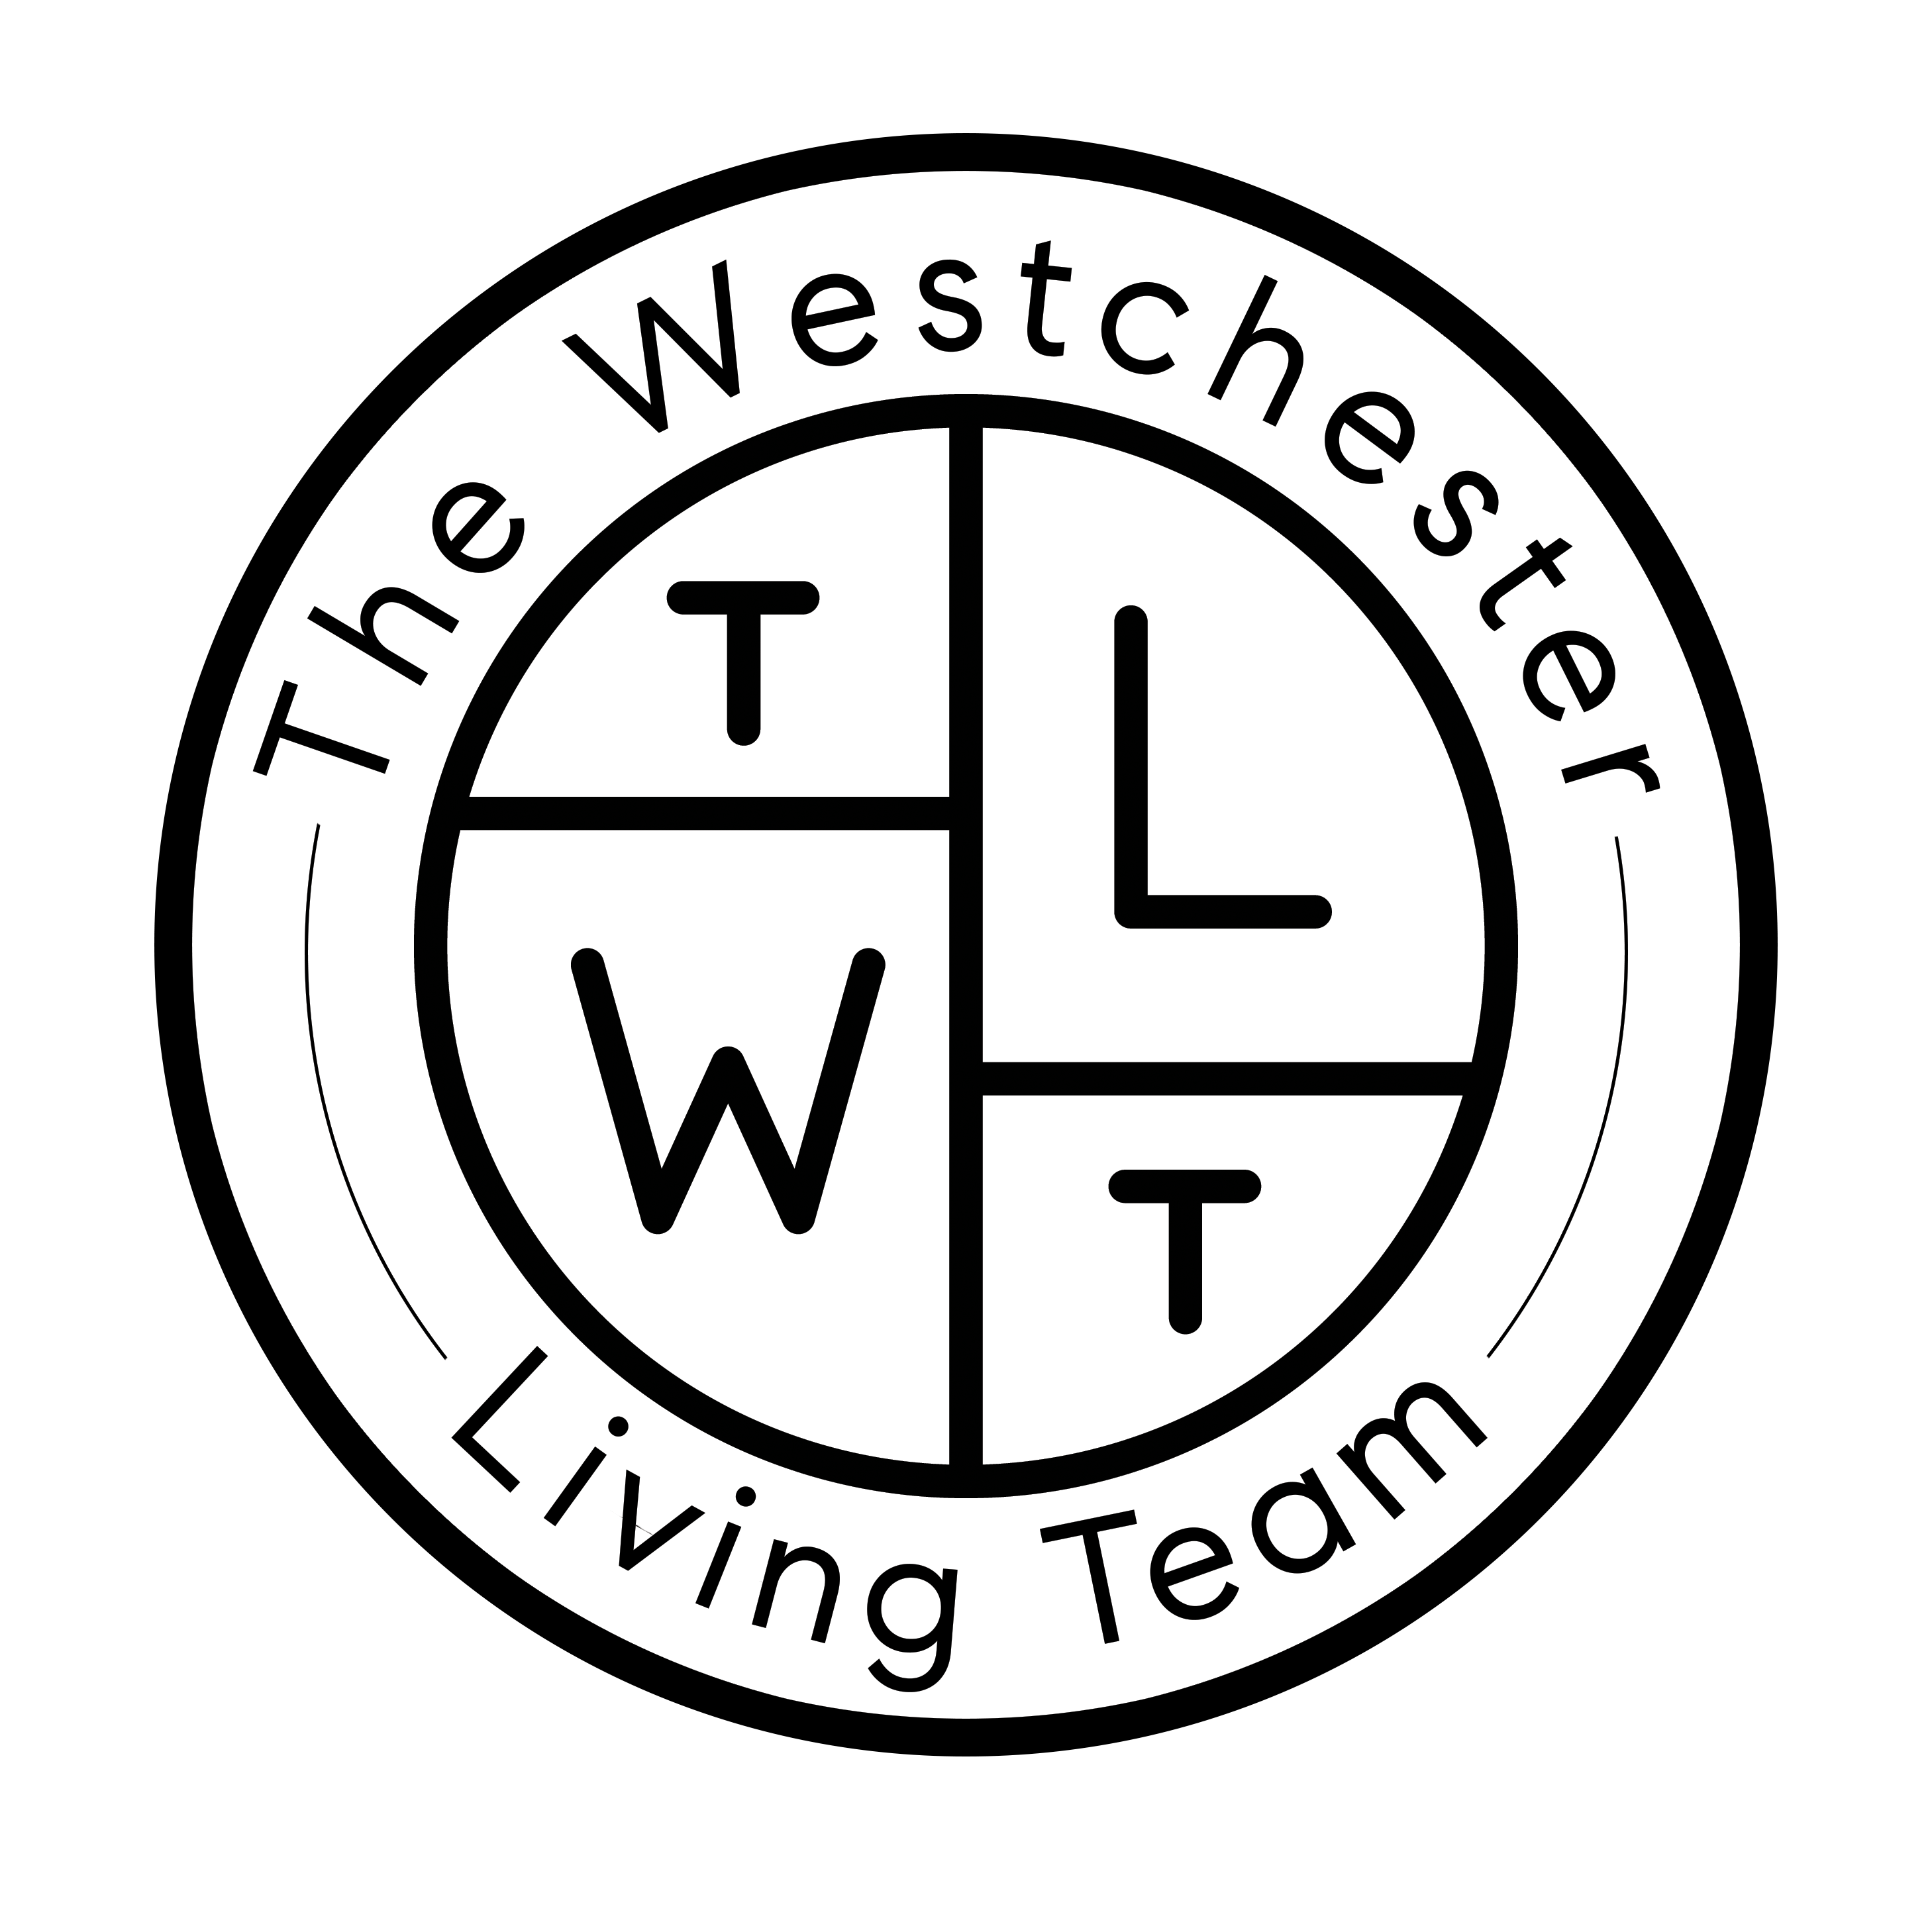 The logo of Westche